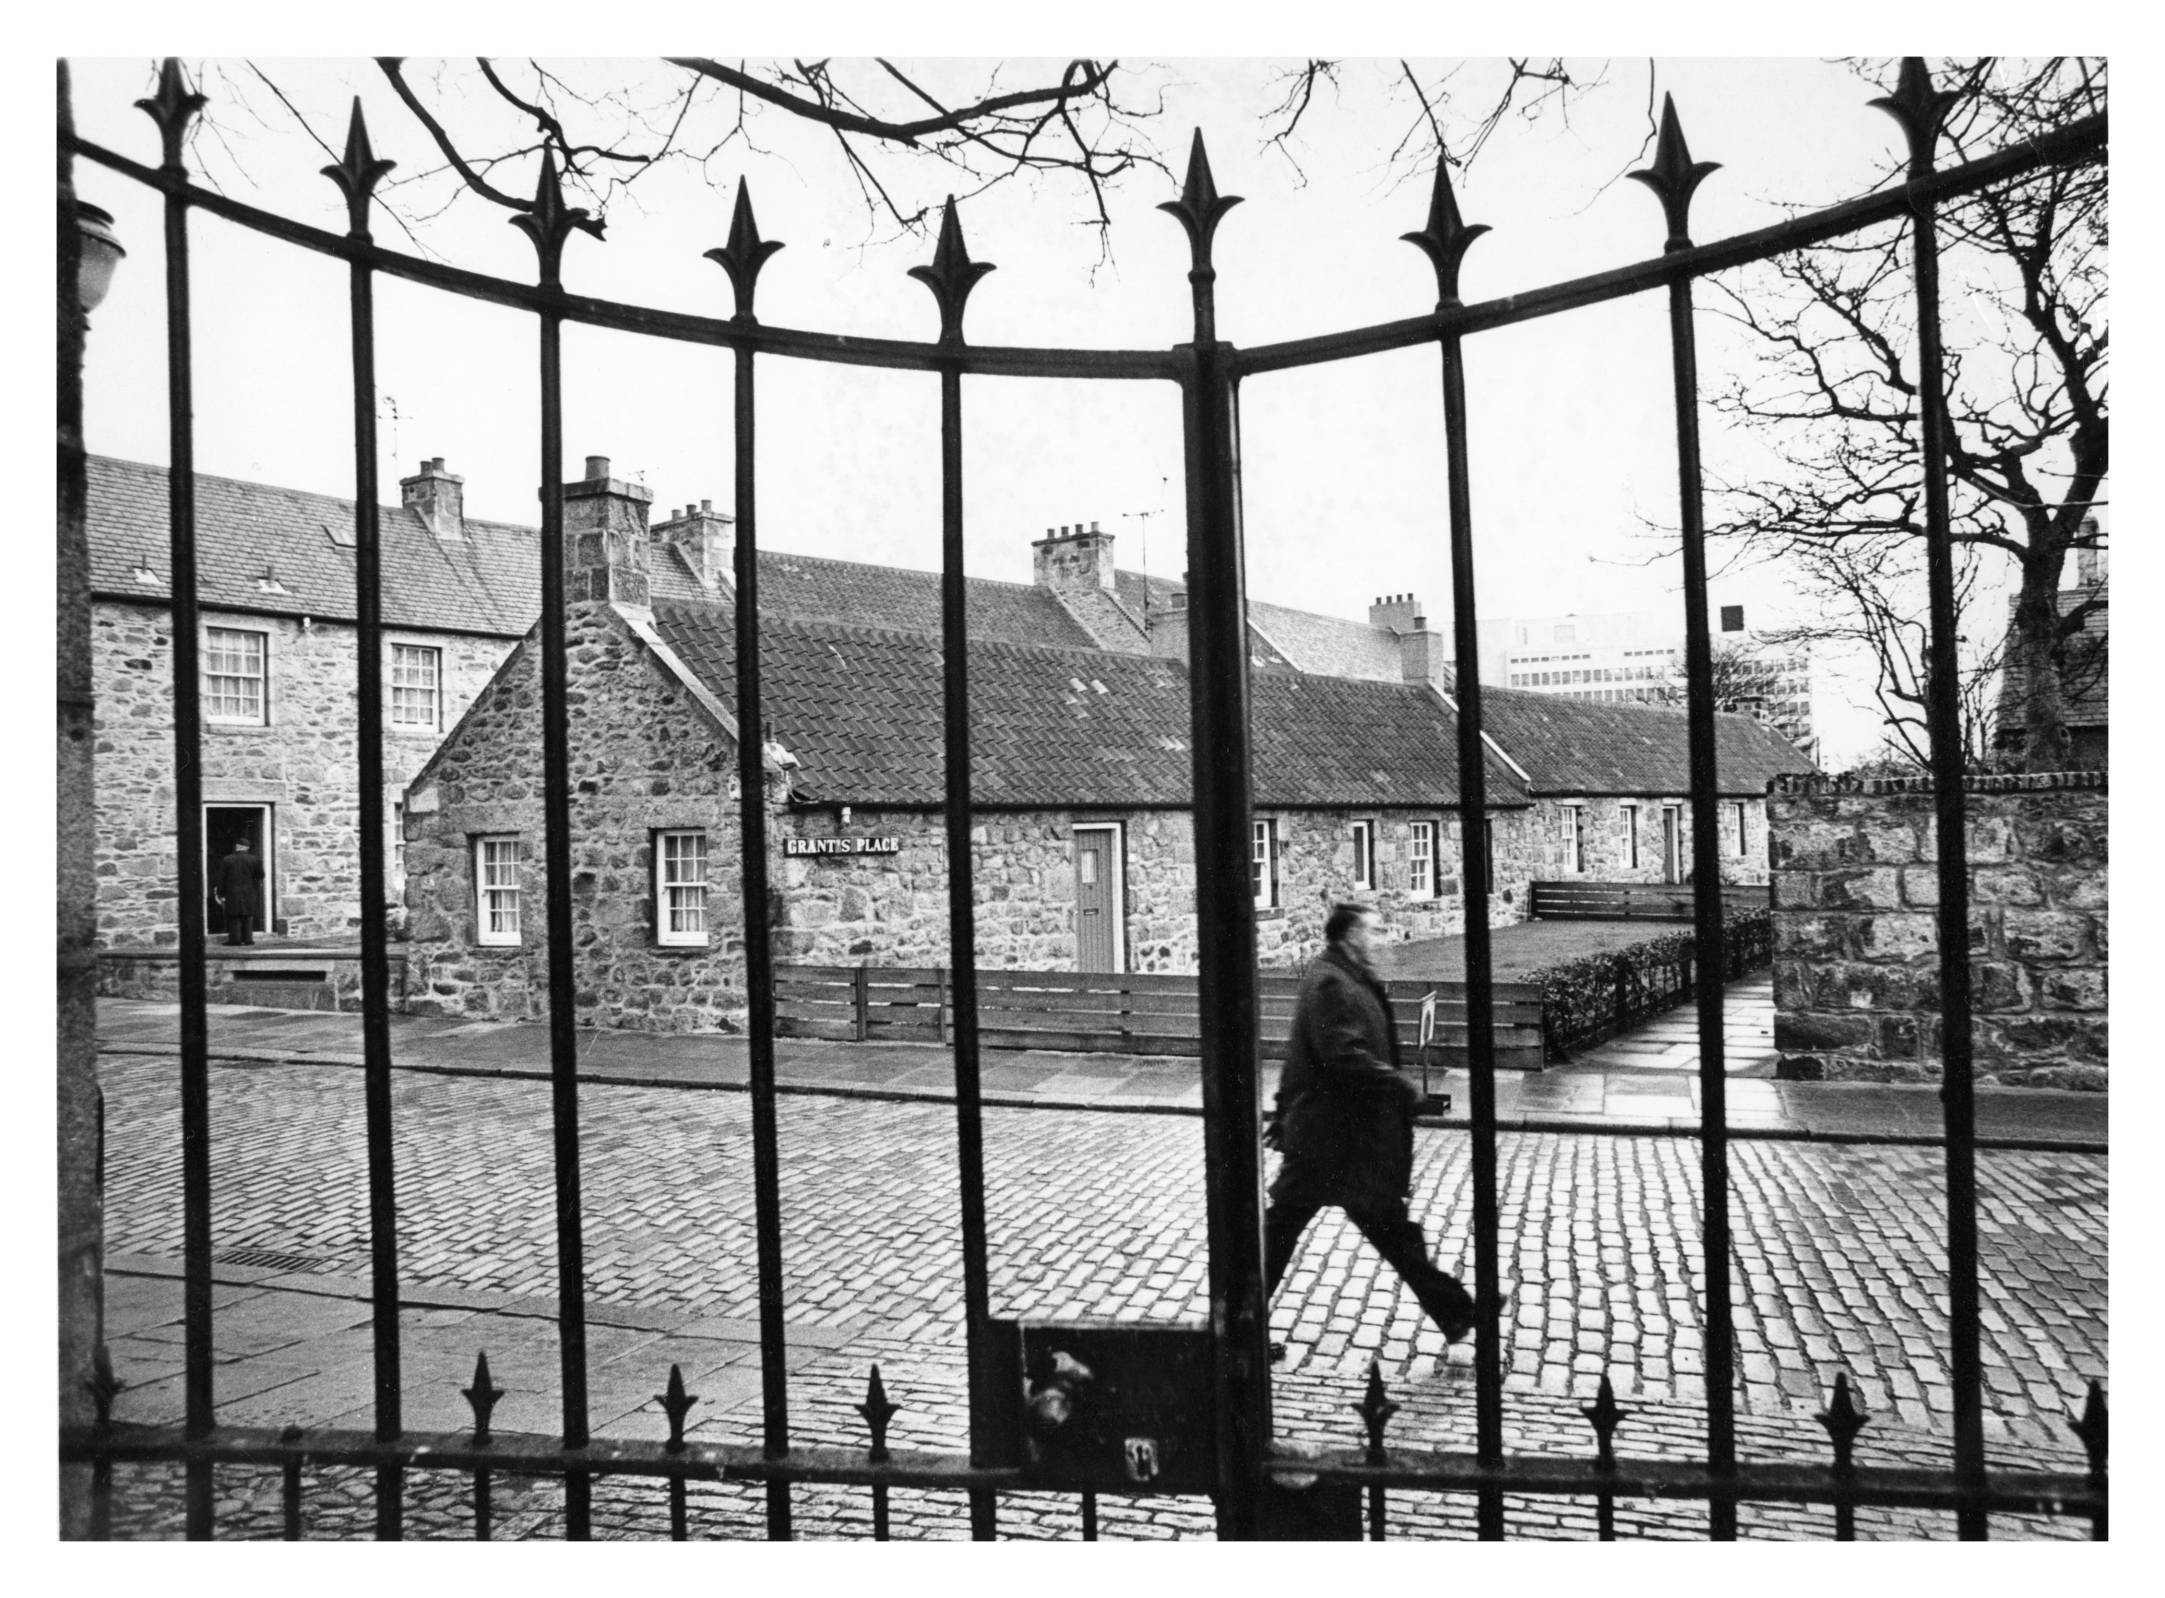 1971: A pedestrian on cobbled Grant's place and the High Street in Old Aberdeen.